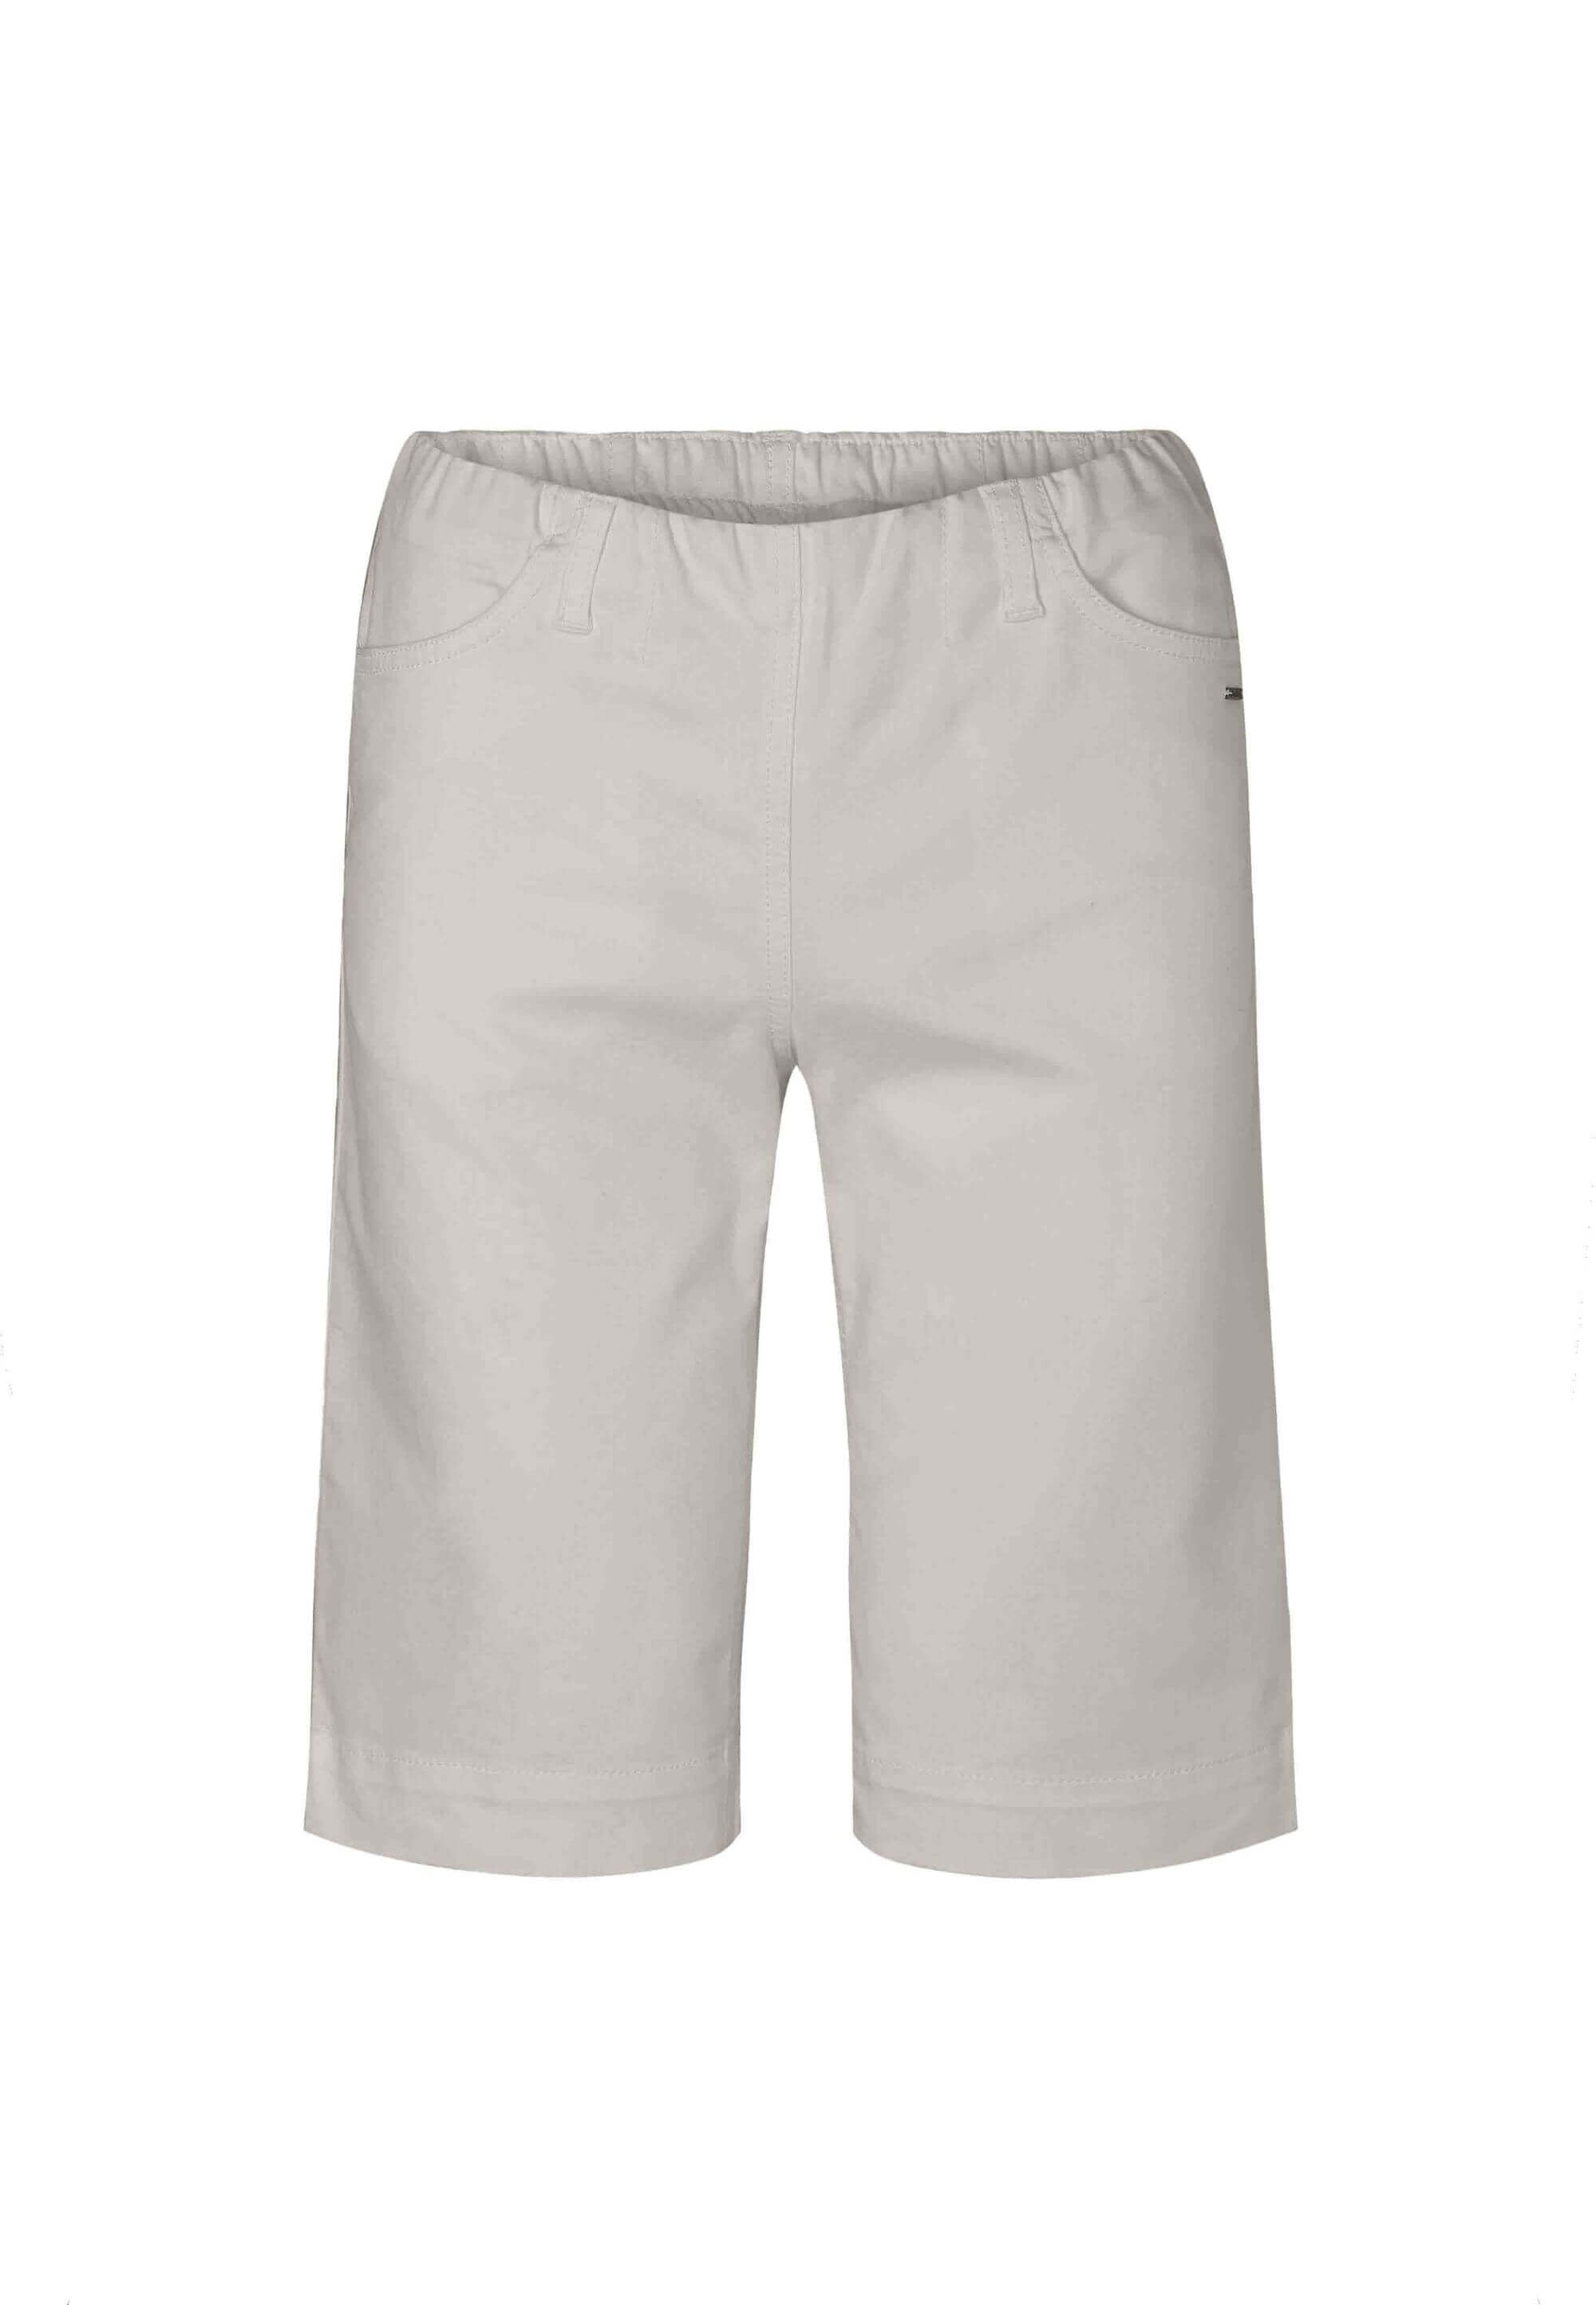 LAURIE Kelly Regular Shorts Trousers REGULAR 25107 Grey Sand